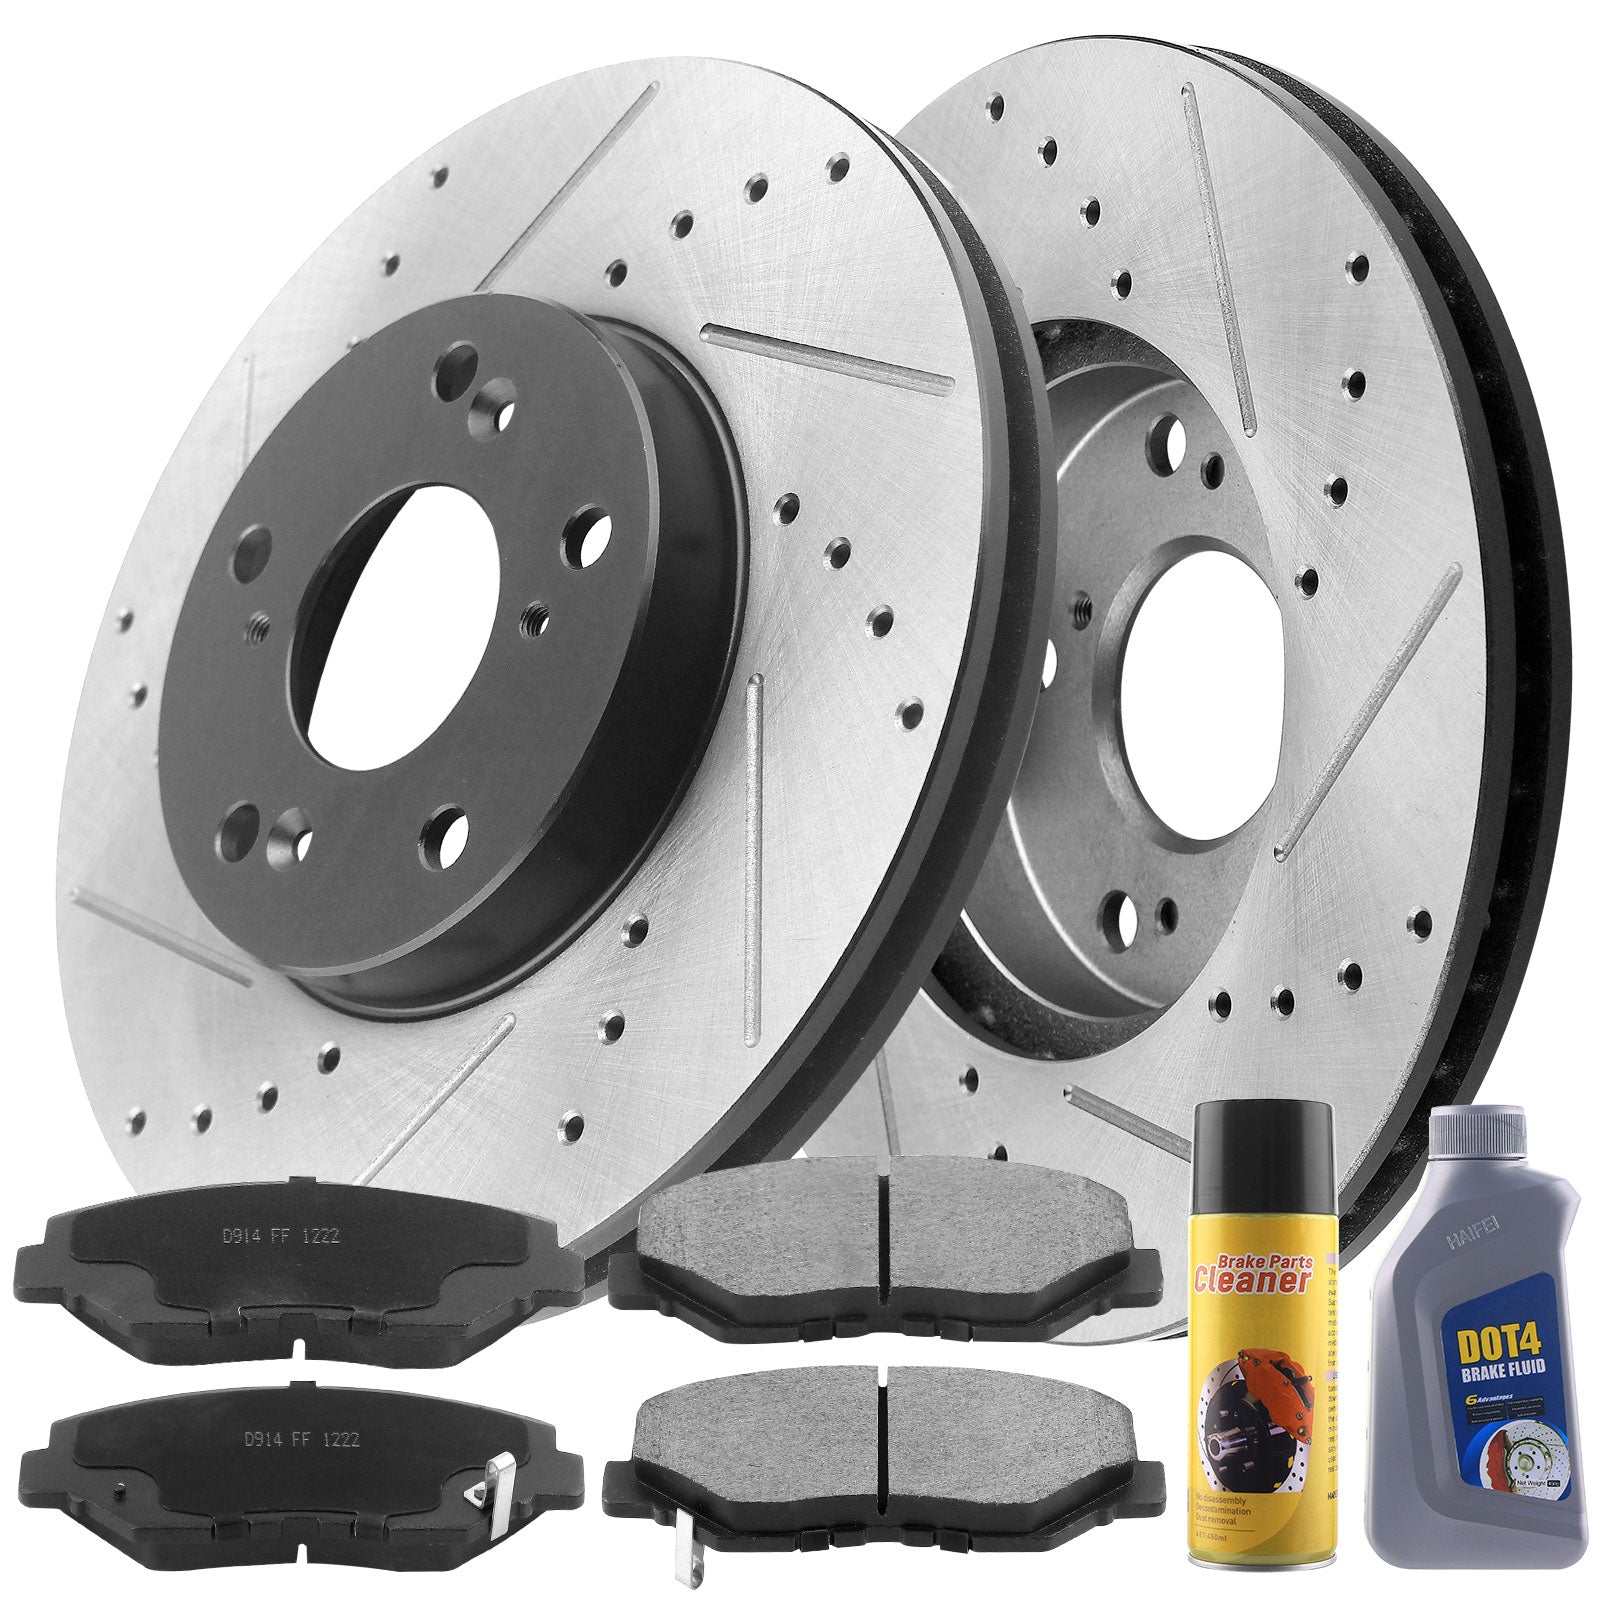 MMotorbyMotor Front Brake Rotors 282mm Drilled & Slotted Design Brake Rotor & Brake Pad kit Including CLEANER DOT4 FLUID Fits for Acura ILX, Honda Civic Accord Element CR-V MotorbyMotor